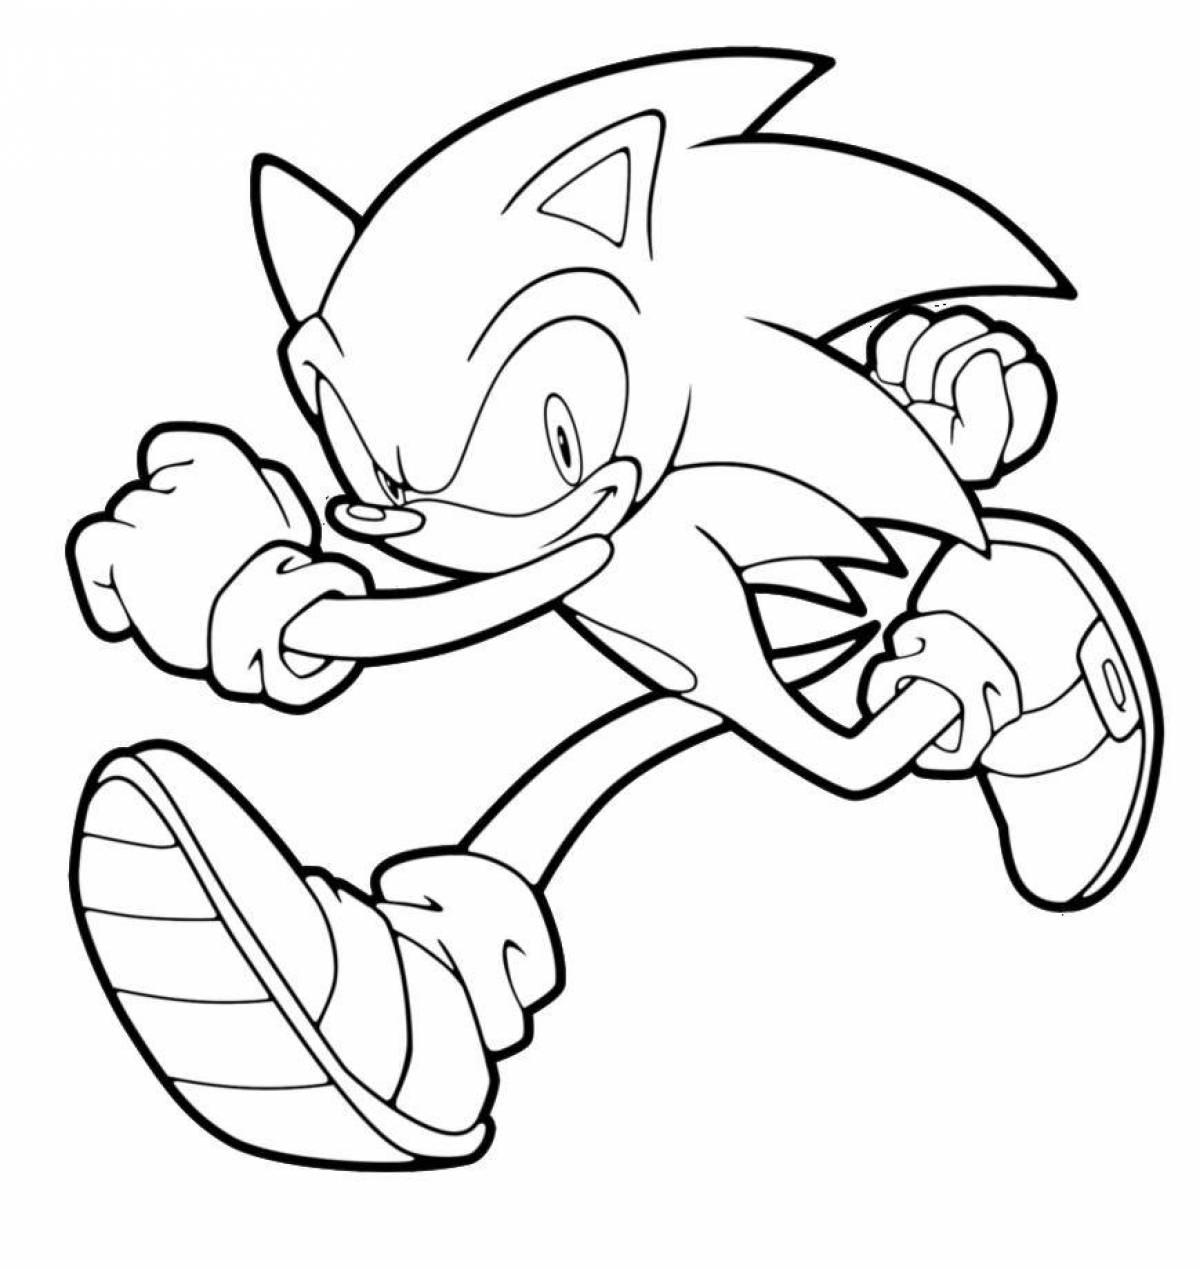 Black sonic mysterious coloring book